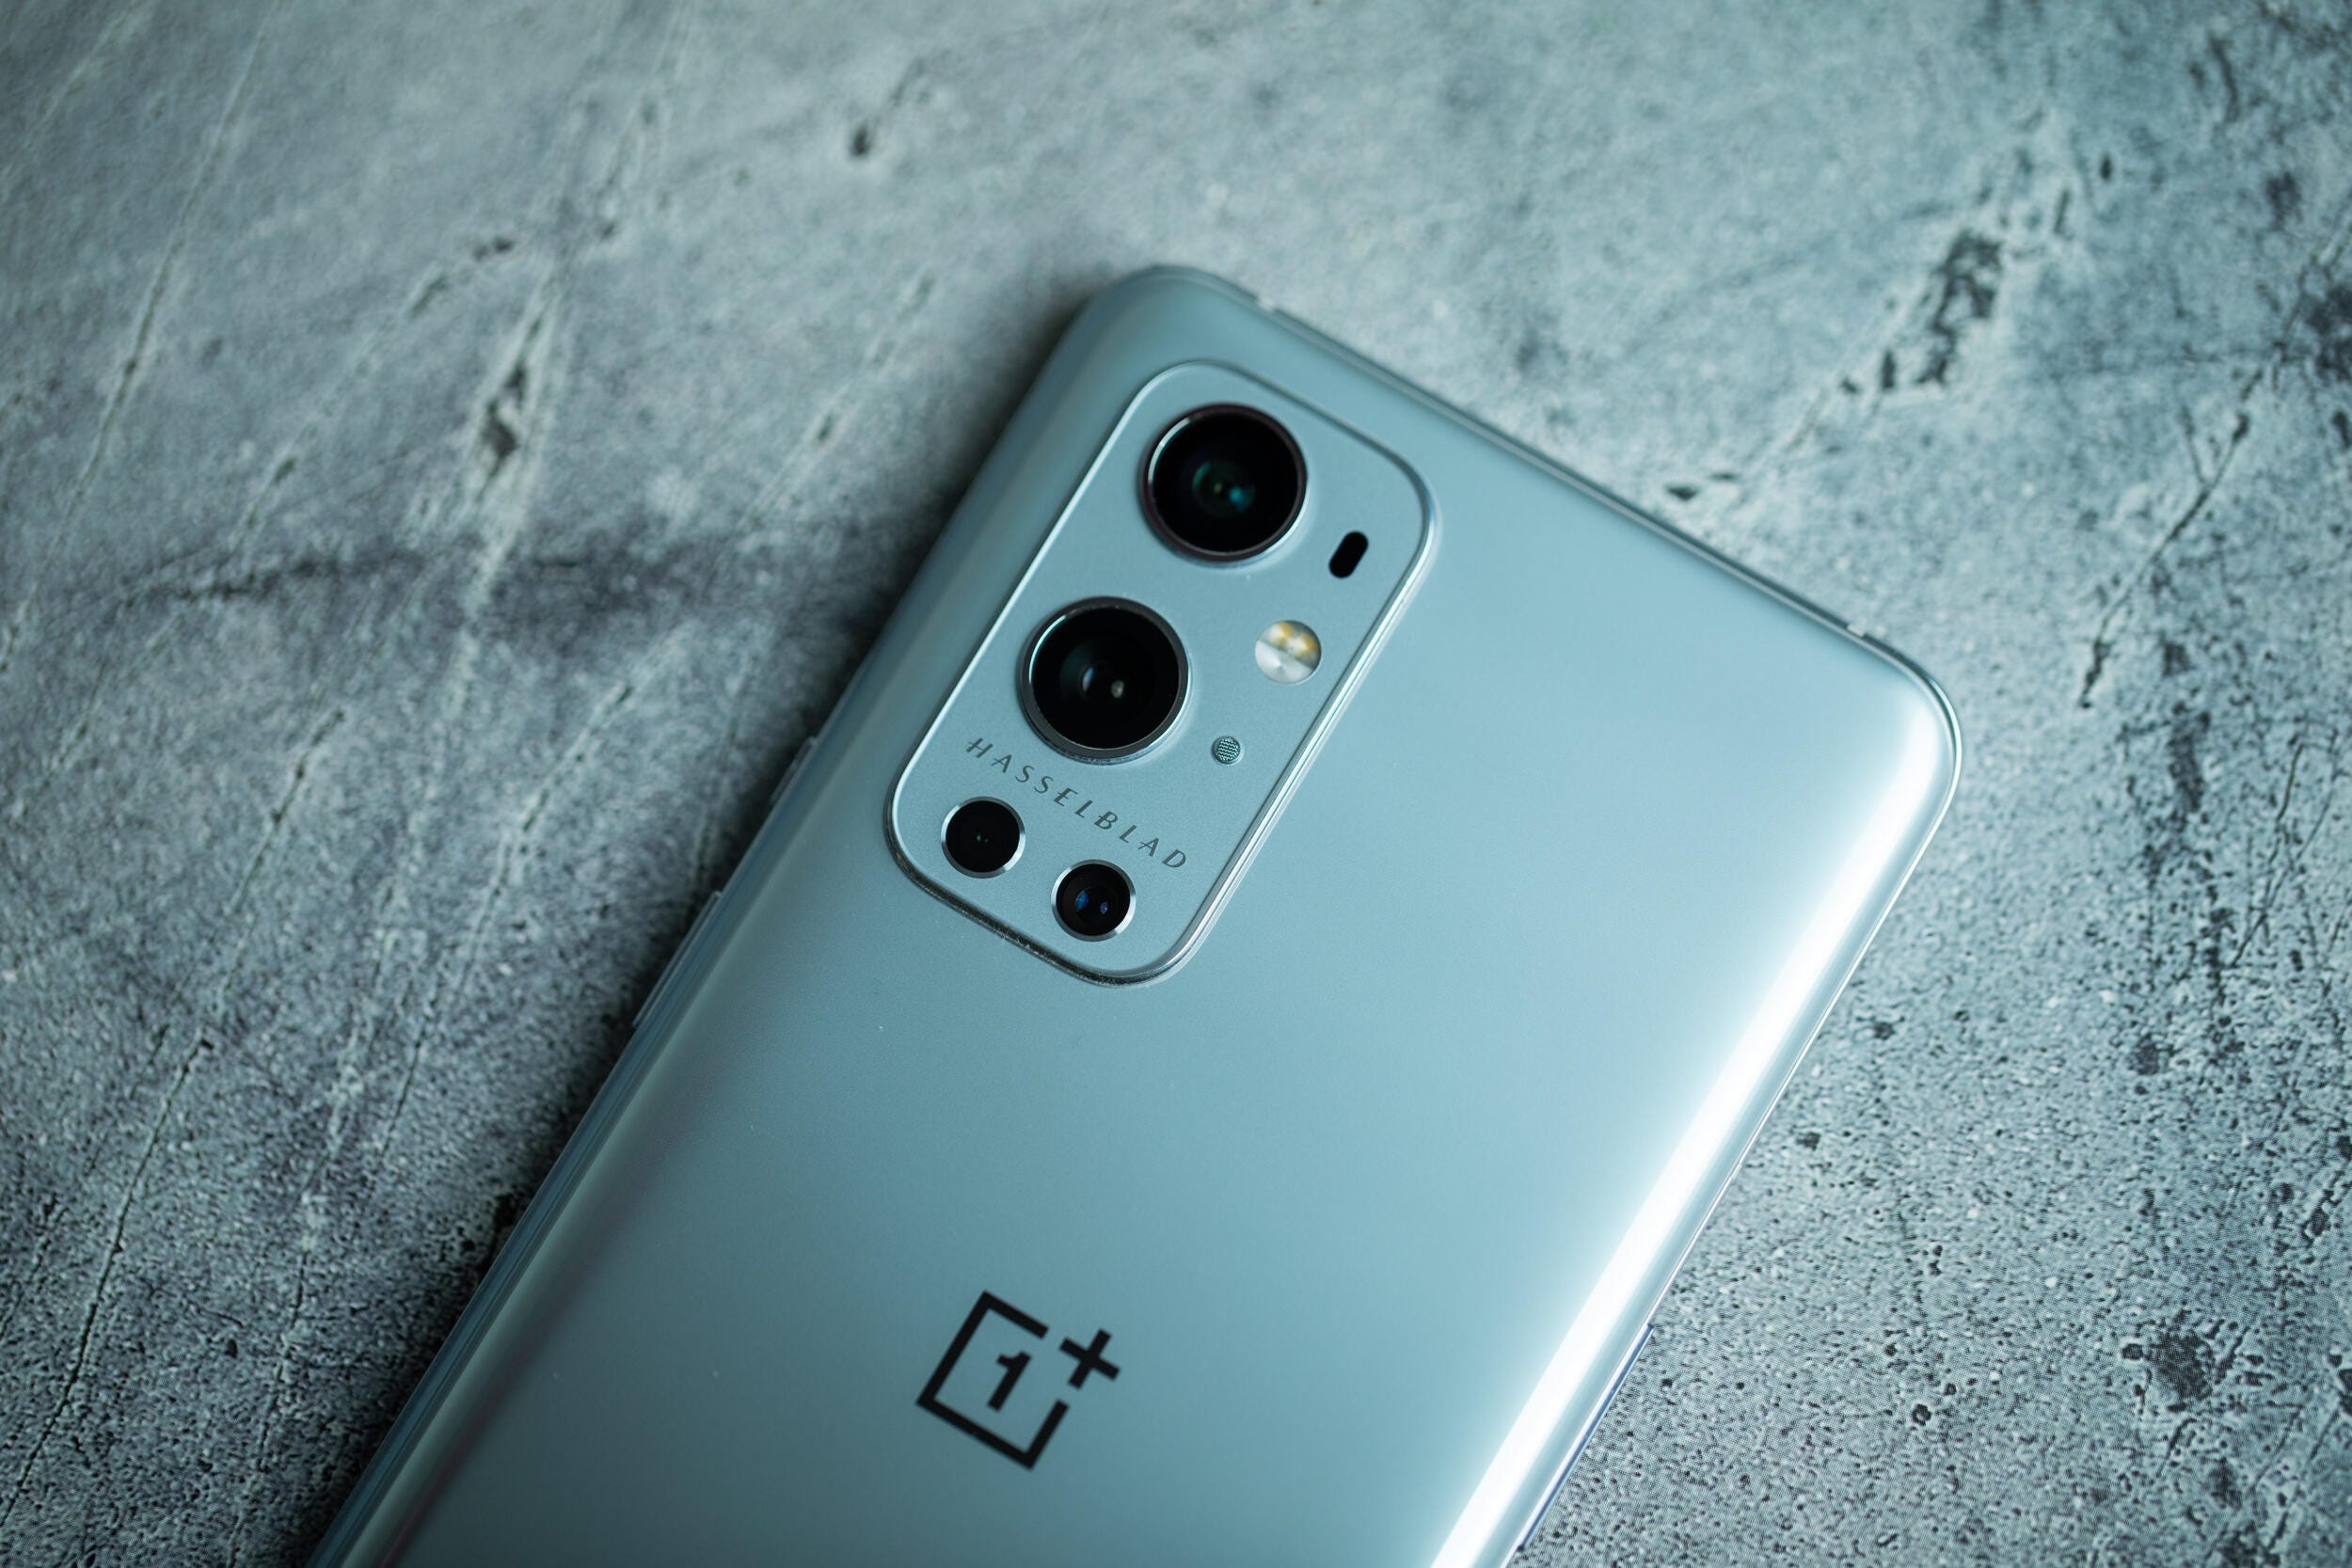 OnePlus 9 Pro review: A classy phone with good enough cameras - CNET